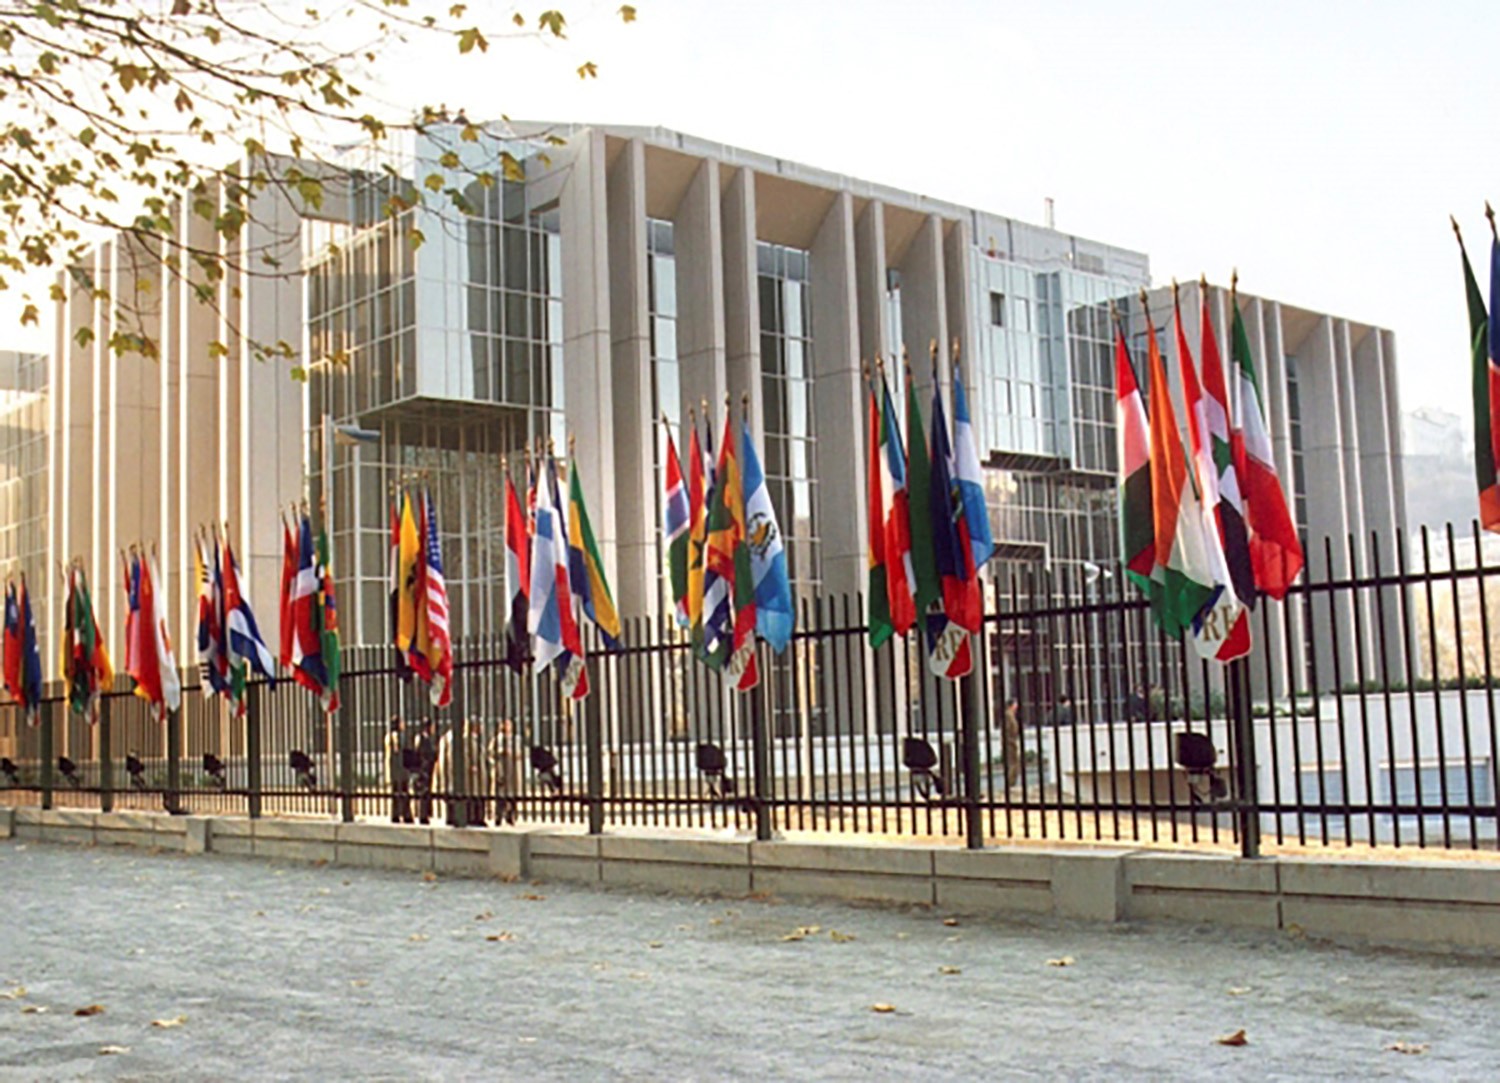 Flags of different countries in front of the Interpol office.